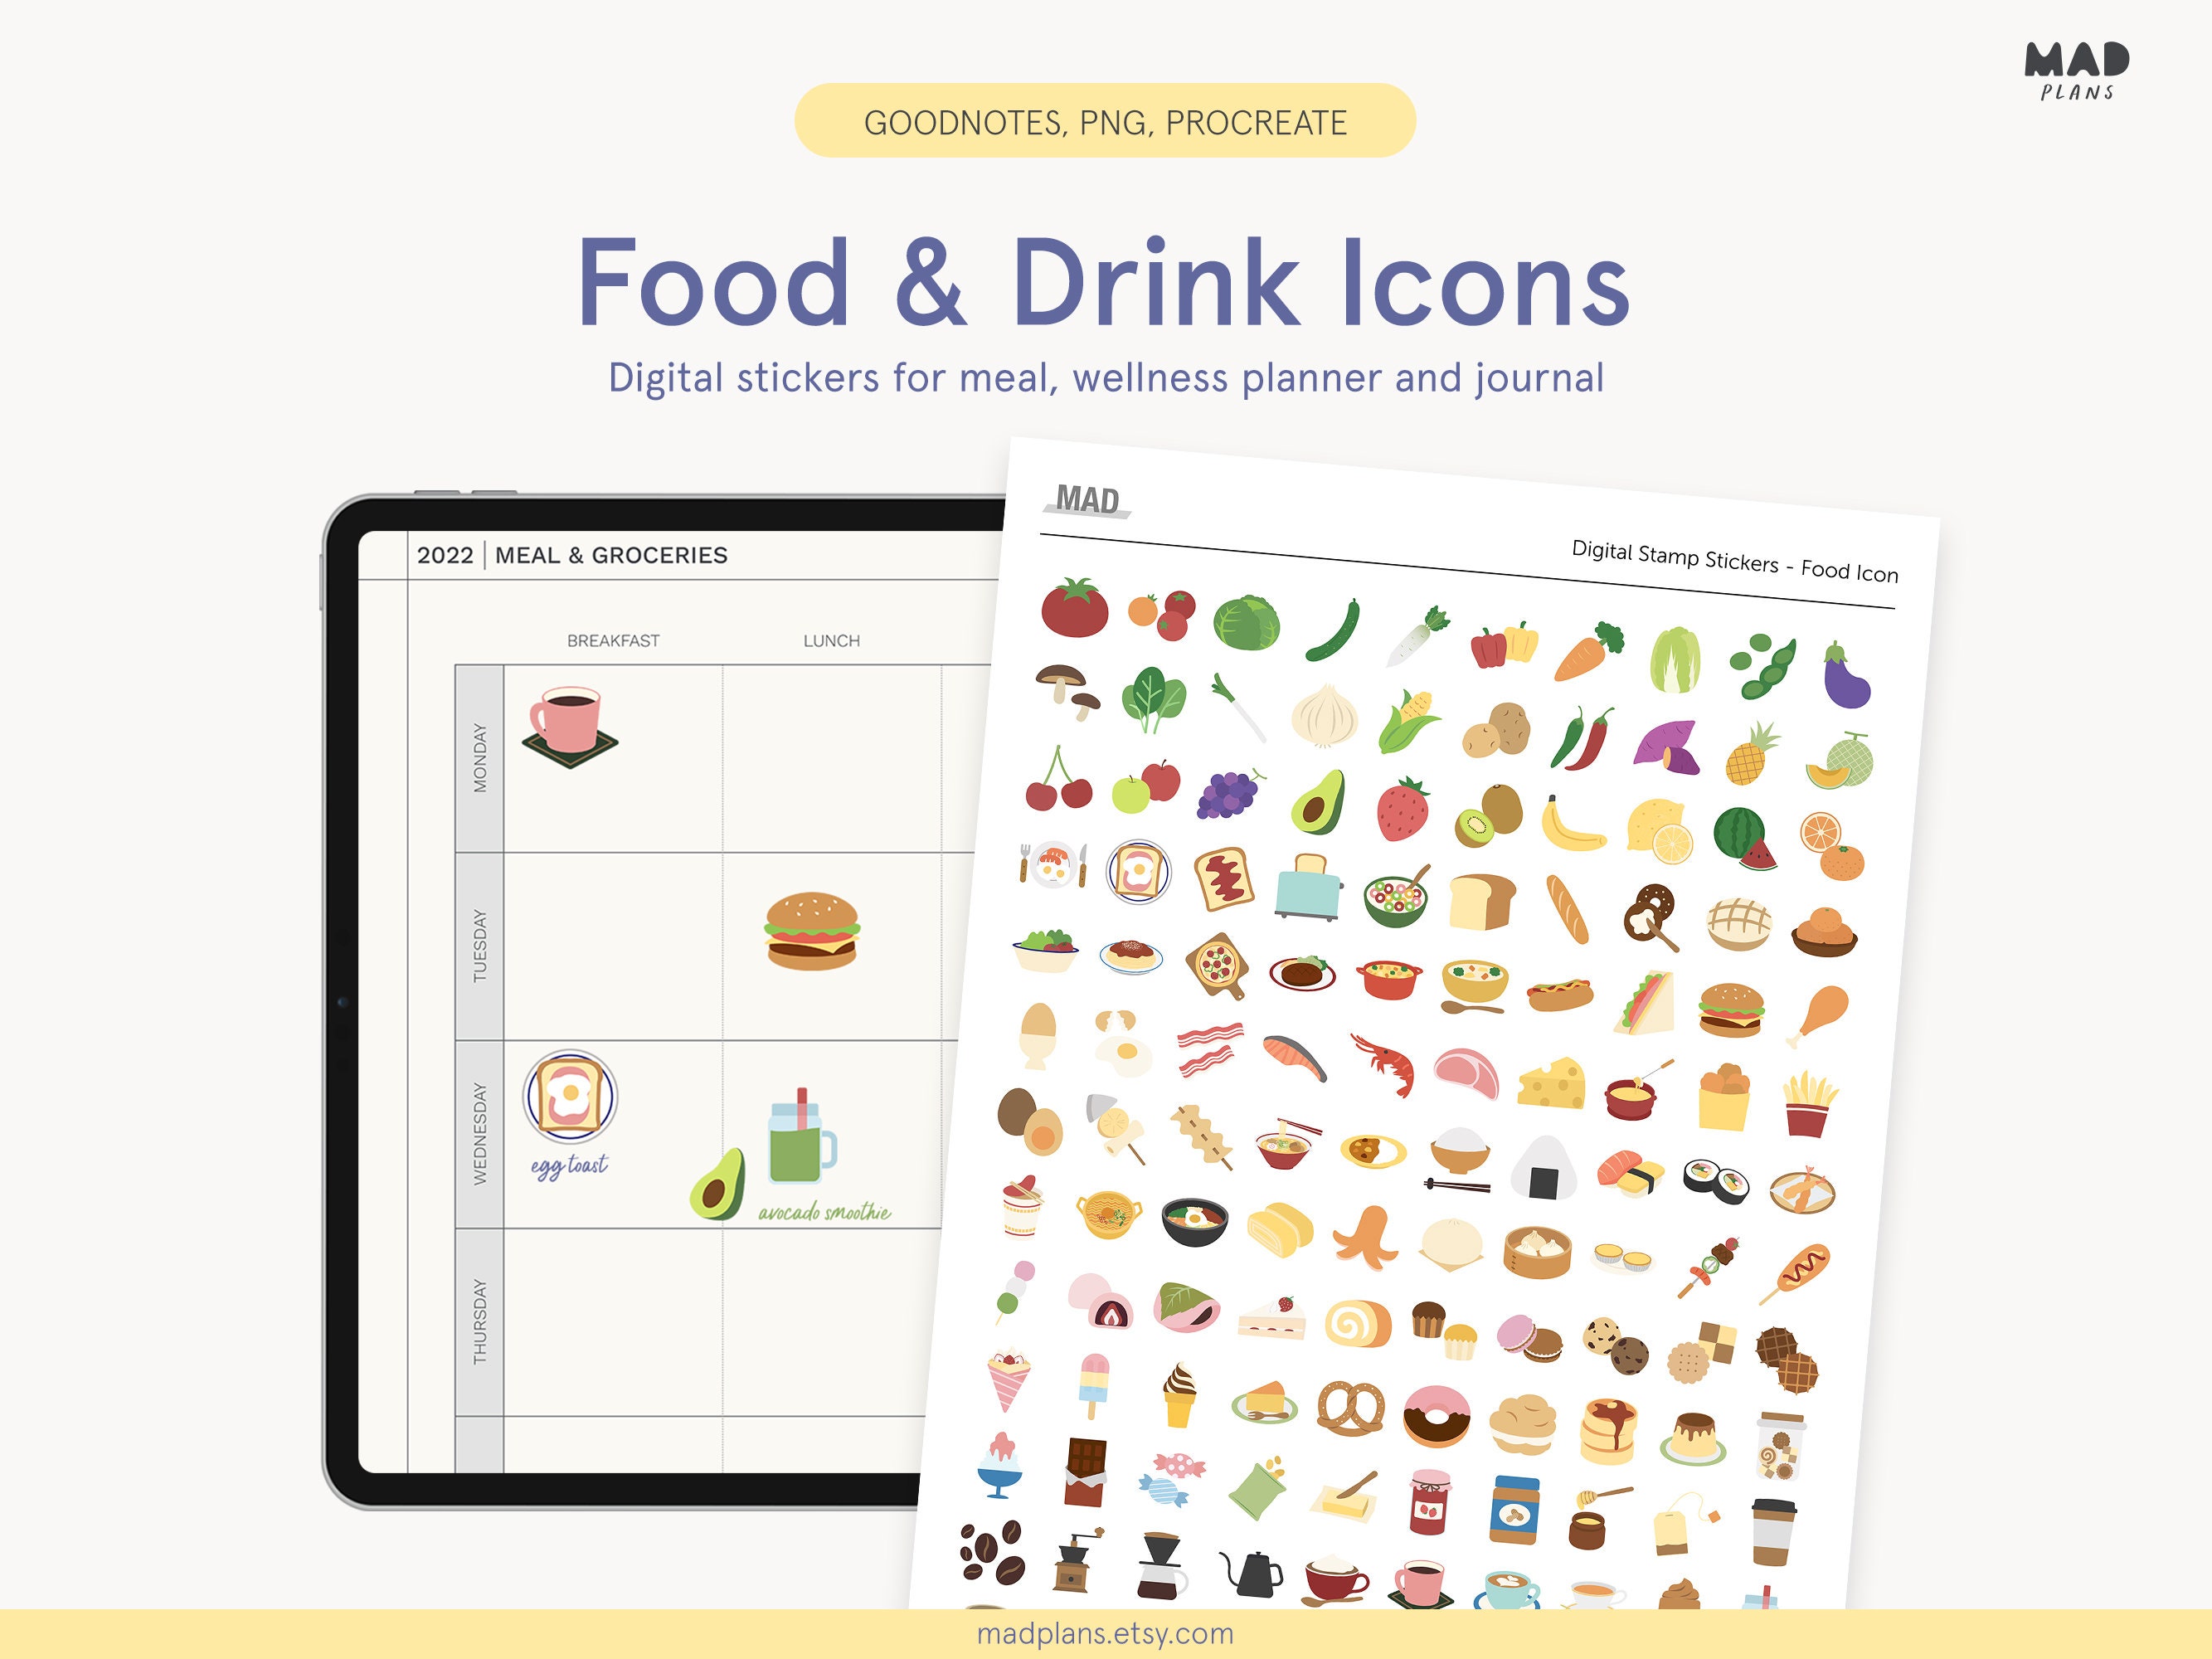 Food and Drink Digital Stickers (Food Stickers, GoodNotes Stickers